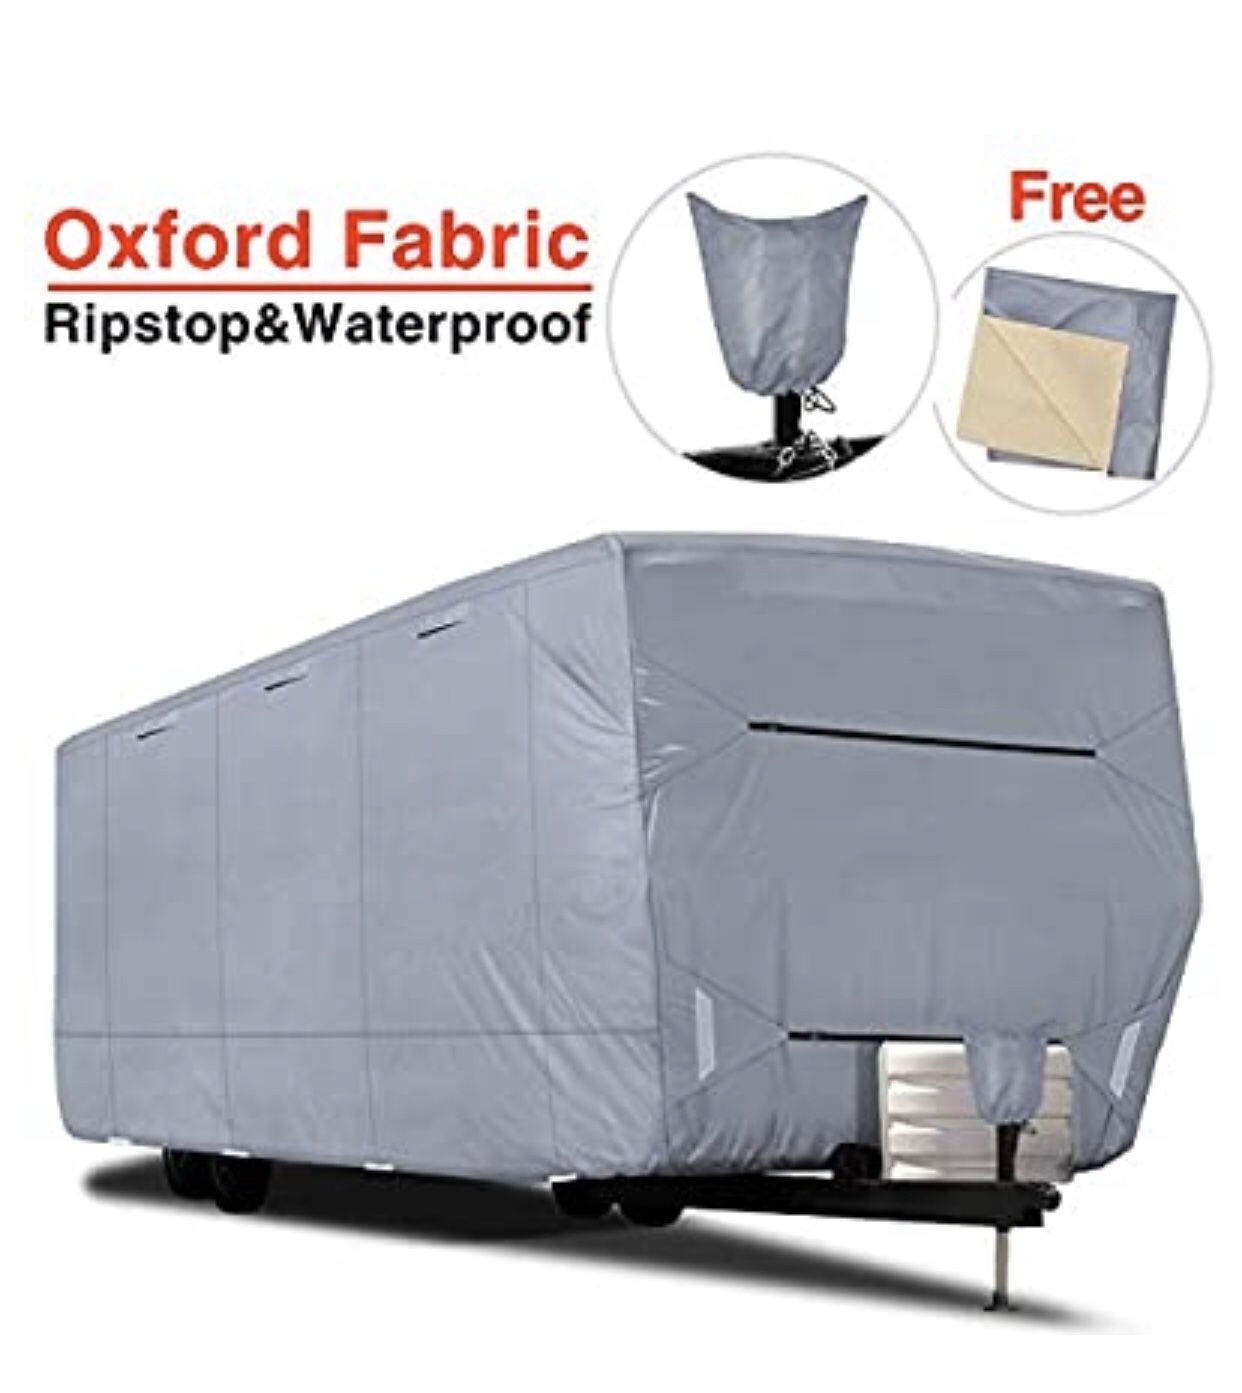 RV Cover - RVMasking Upgraded 100% Waterproof Oxford Travel Trailer RV Cover, Fits 28'7" - 31'6" RVs